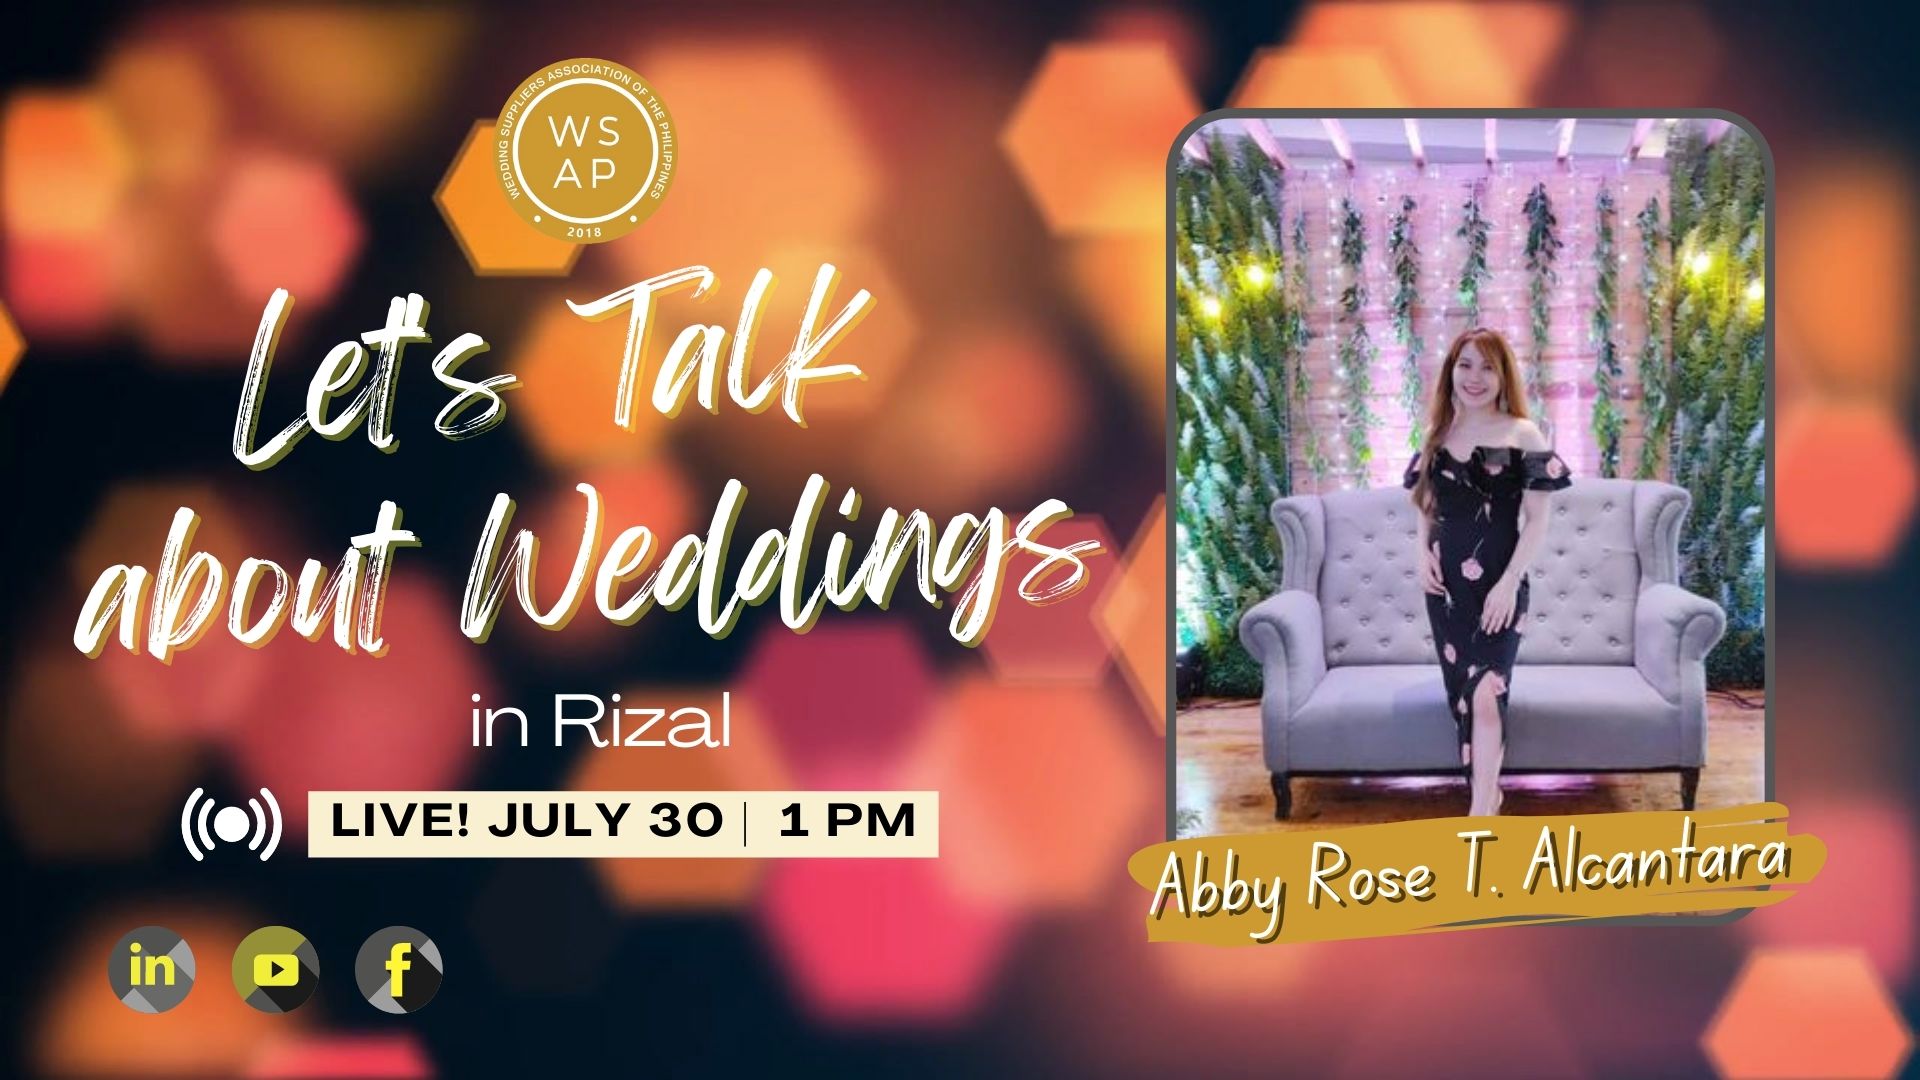 Let's Talk About Weddings  in Rizal with Abby Rose Alcantara